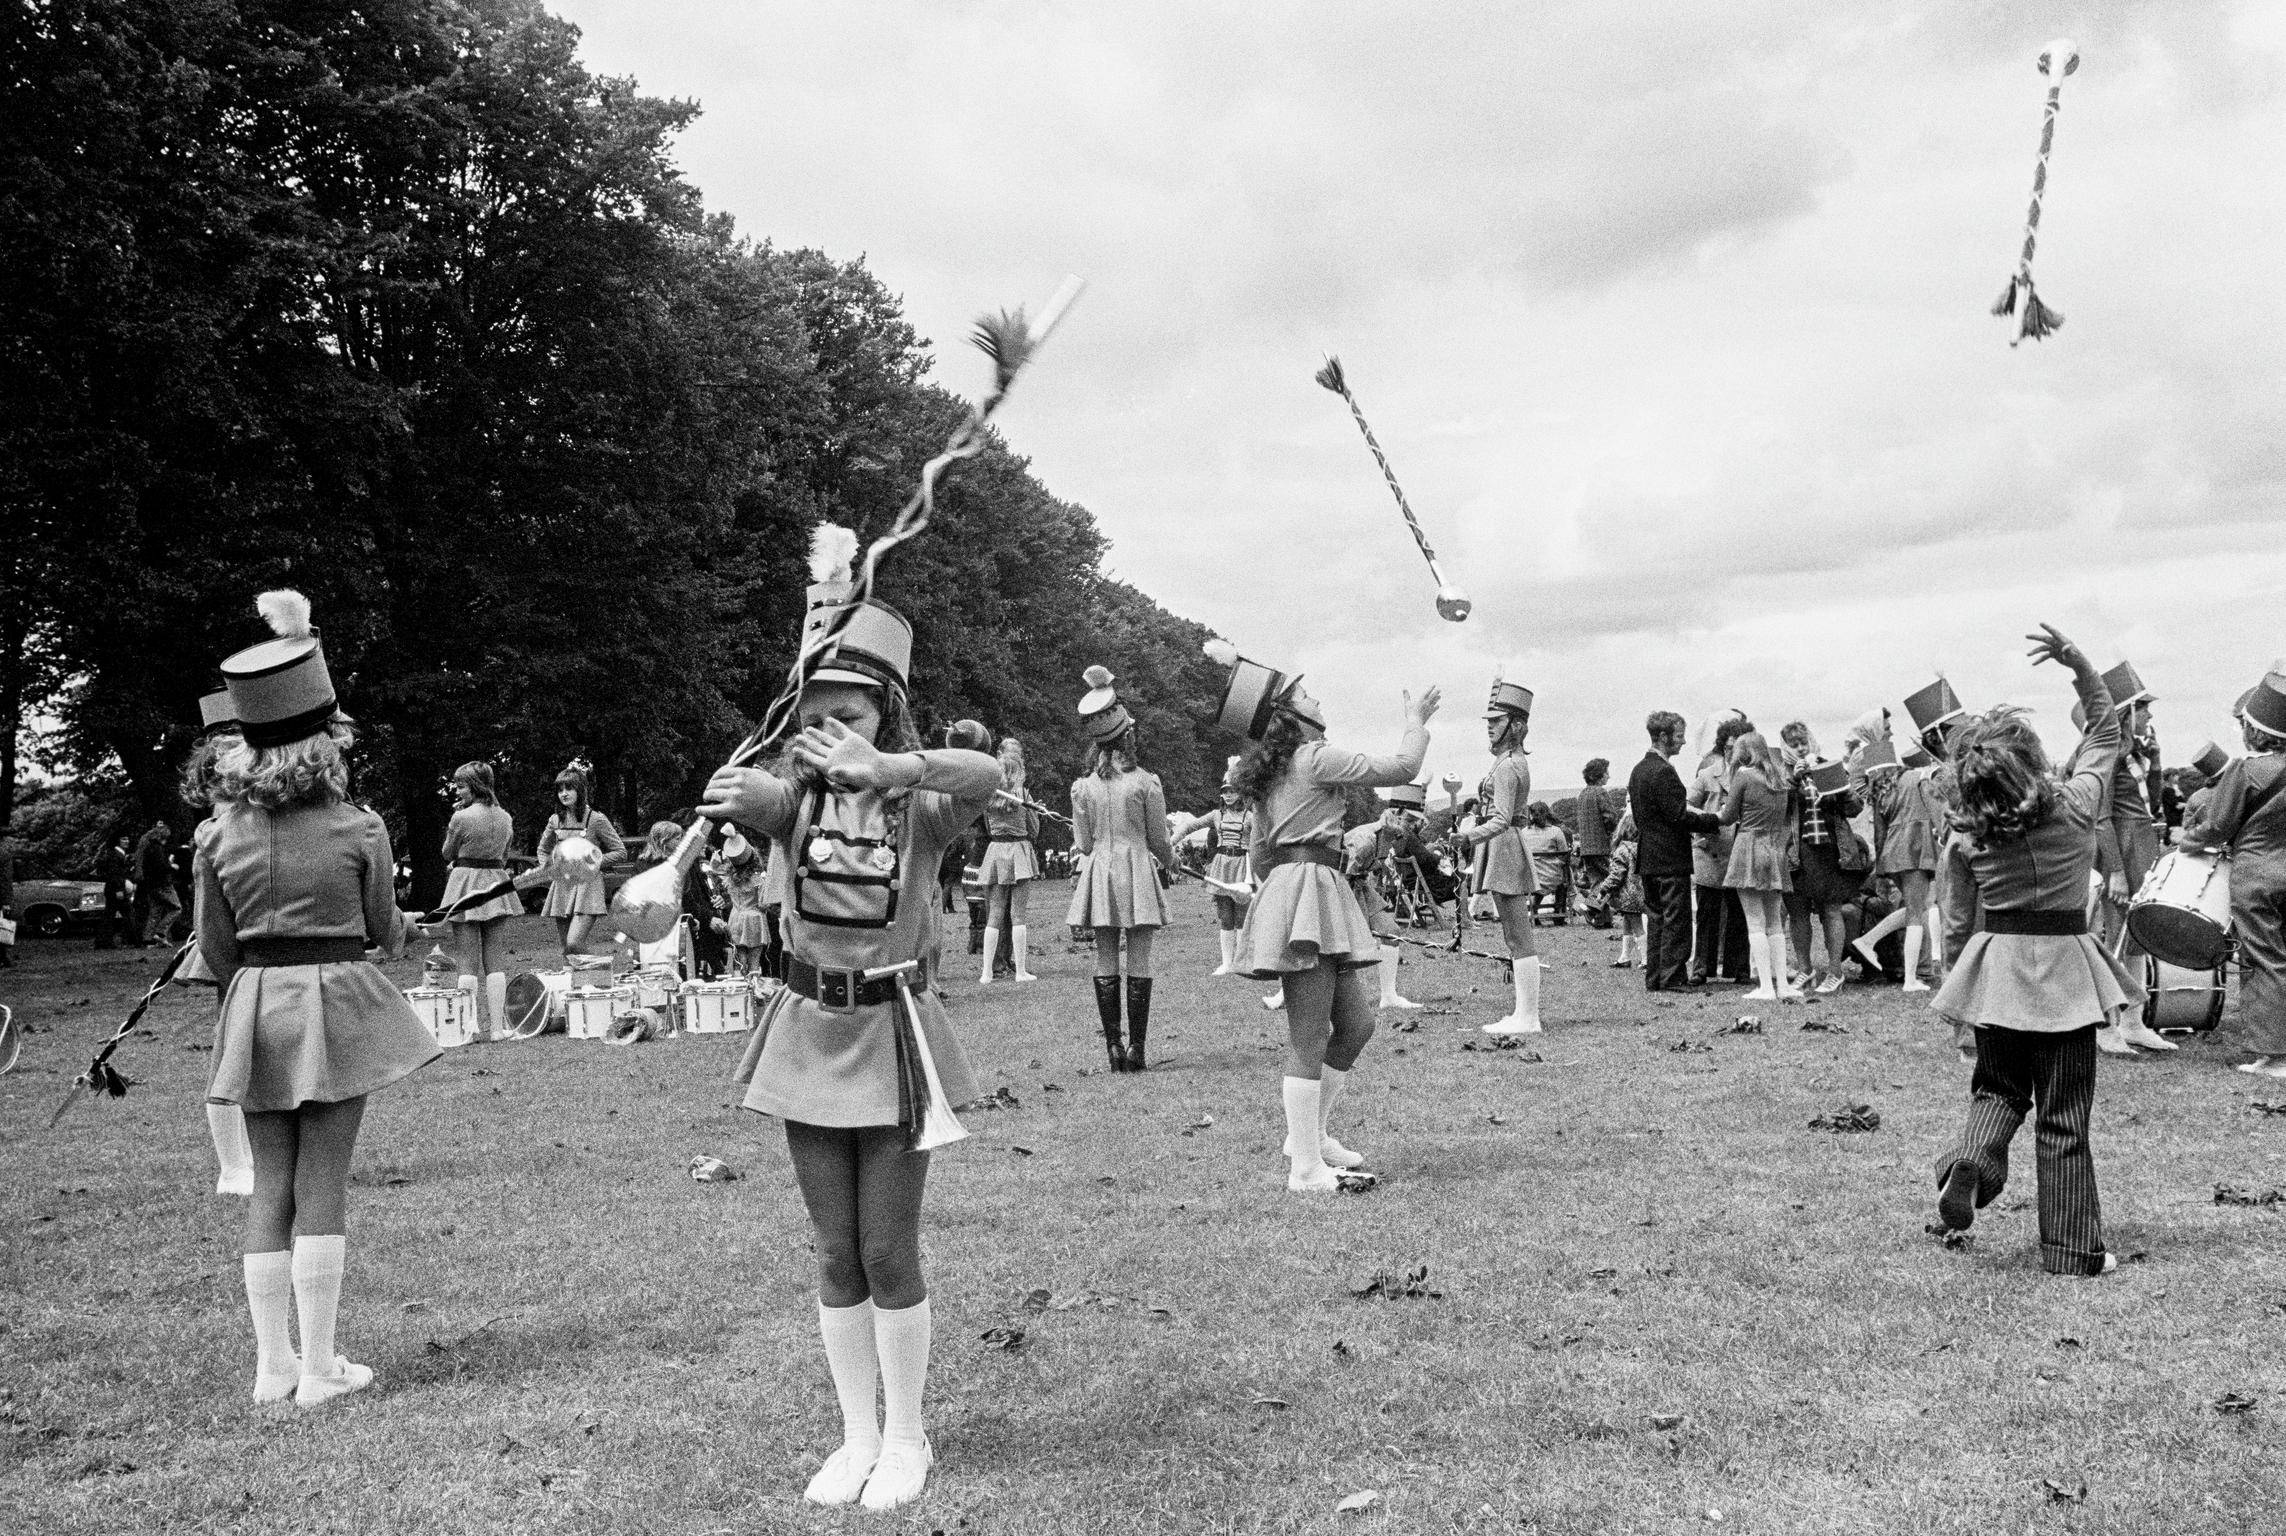 Miners Gala. Marching band practice. Cardiff, Wales